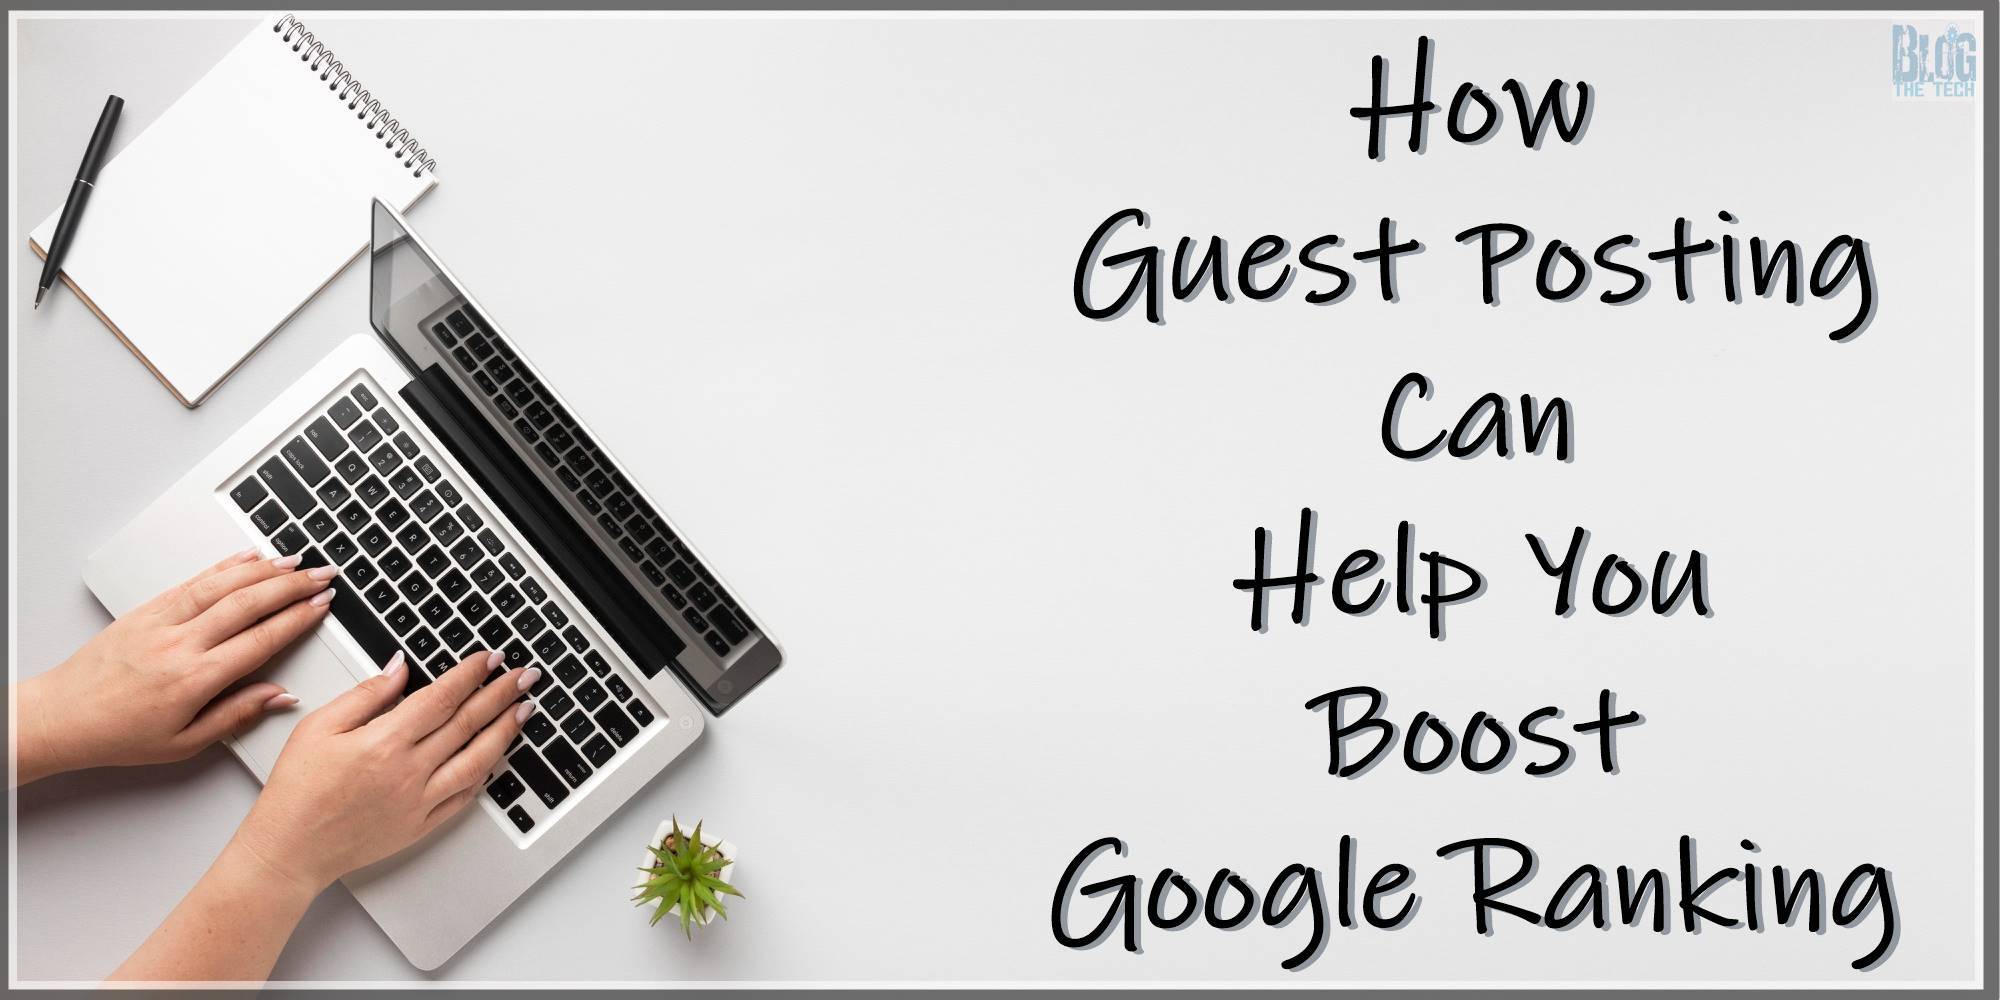 How Guest Posting Can Help You Boost Google Ranking